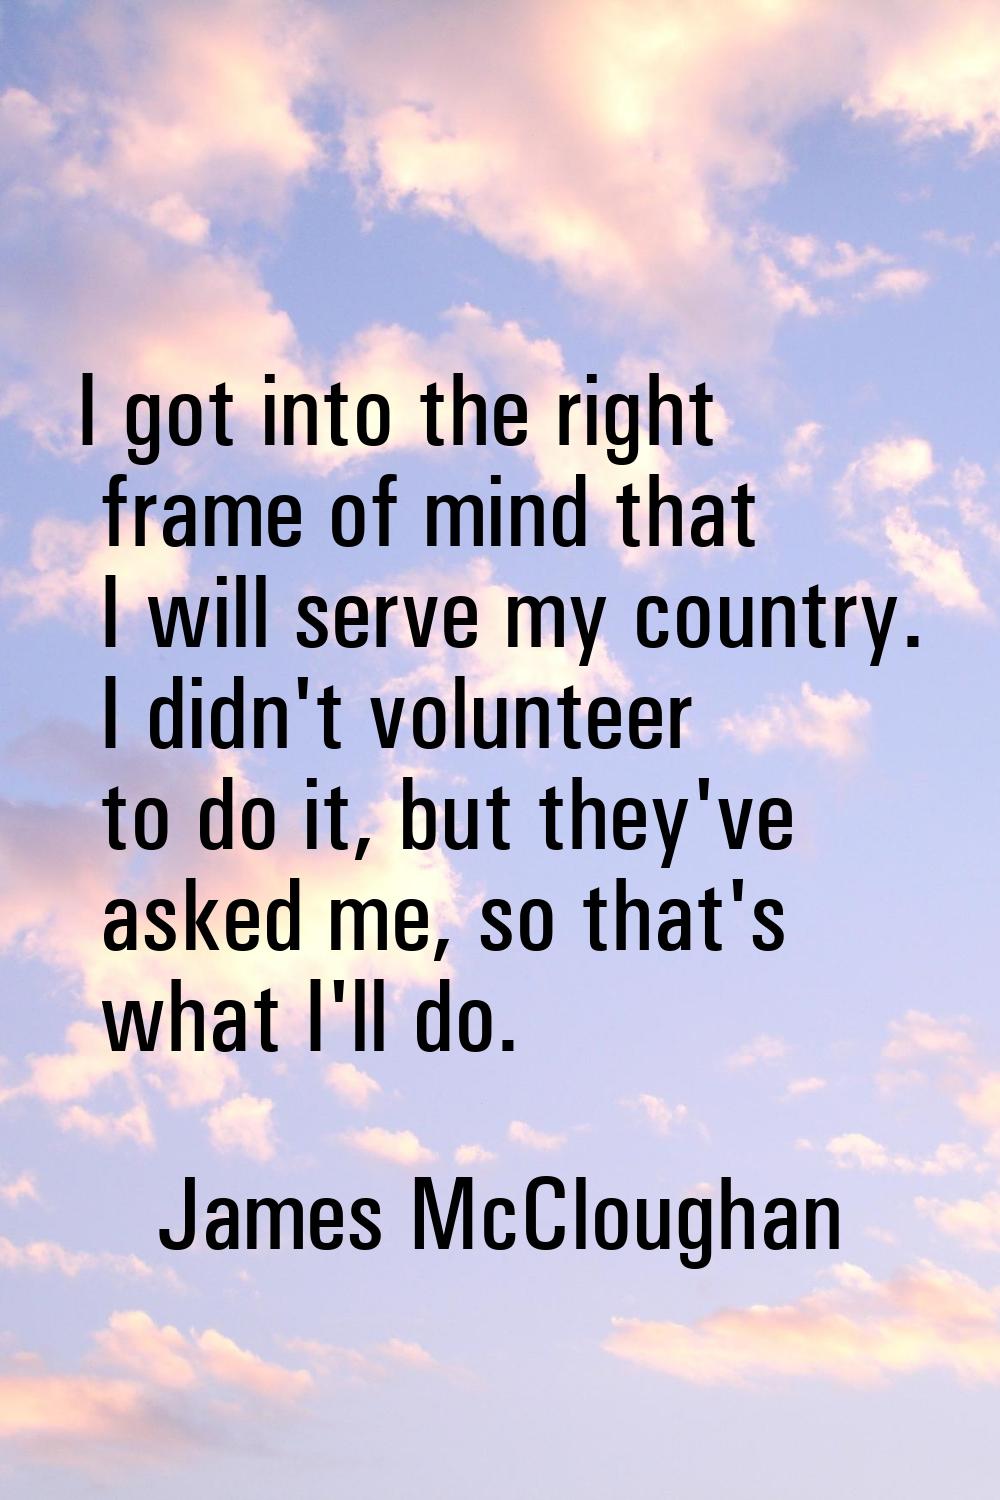 I got into the right frame of mind that I will serve my country. I didn't volunteer to do it, but t